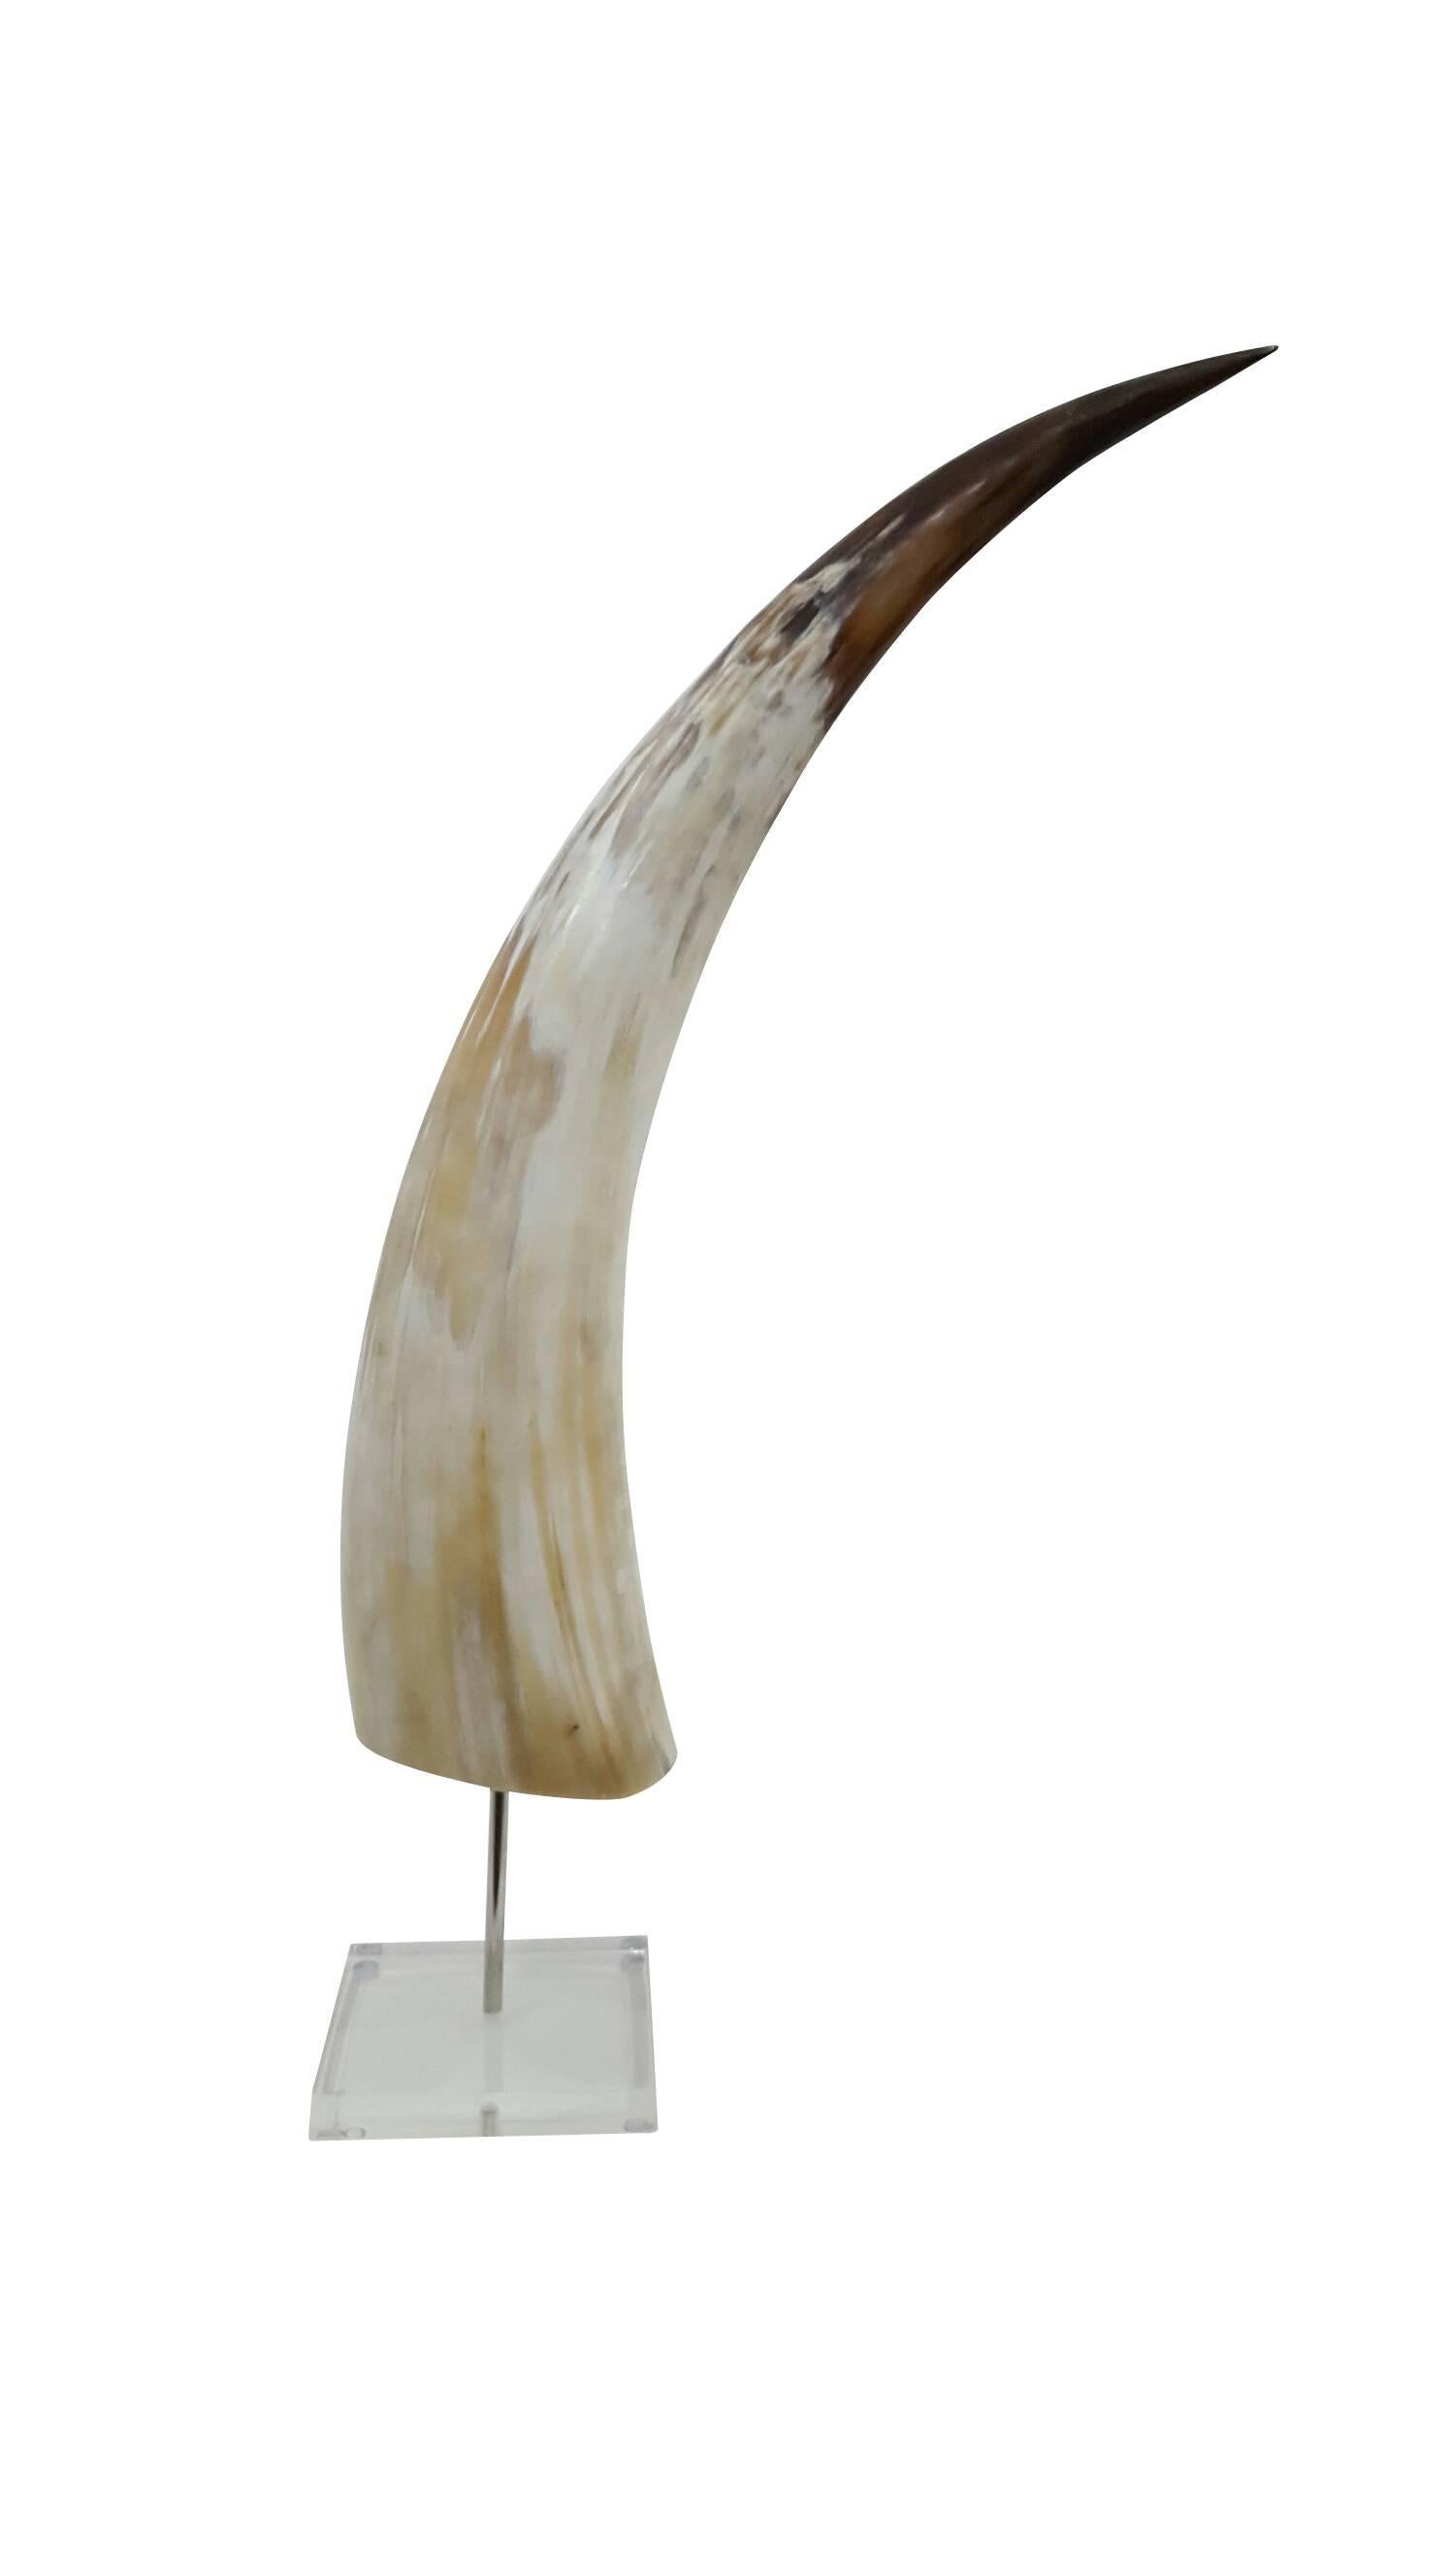 Beautiful Horn on acrylic stand.
Dimensions: Stand 5" x 5", total height 30.5".